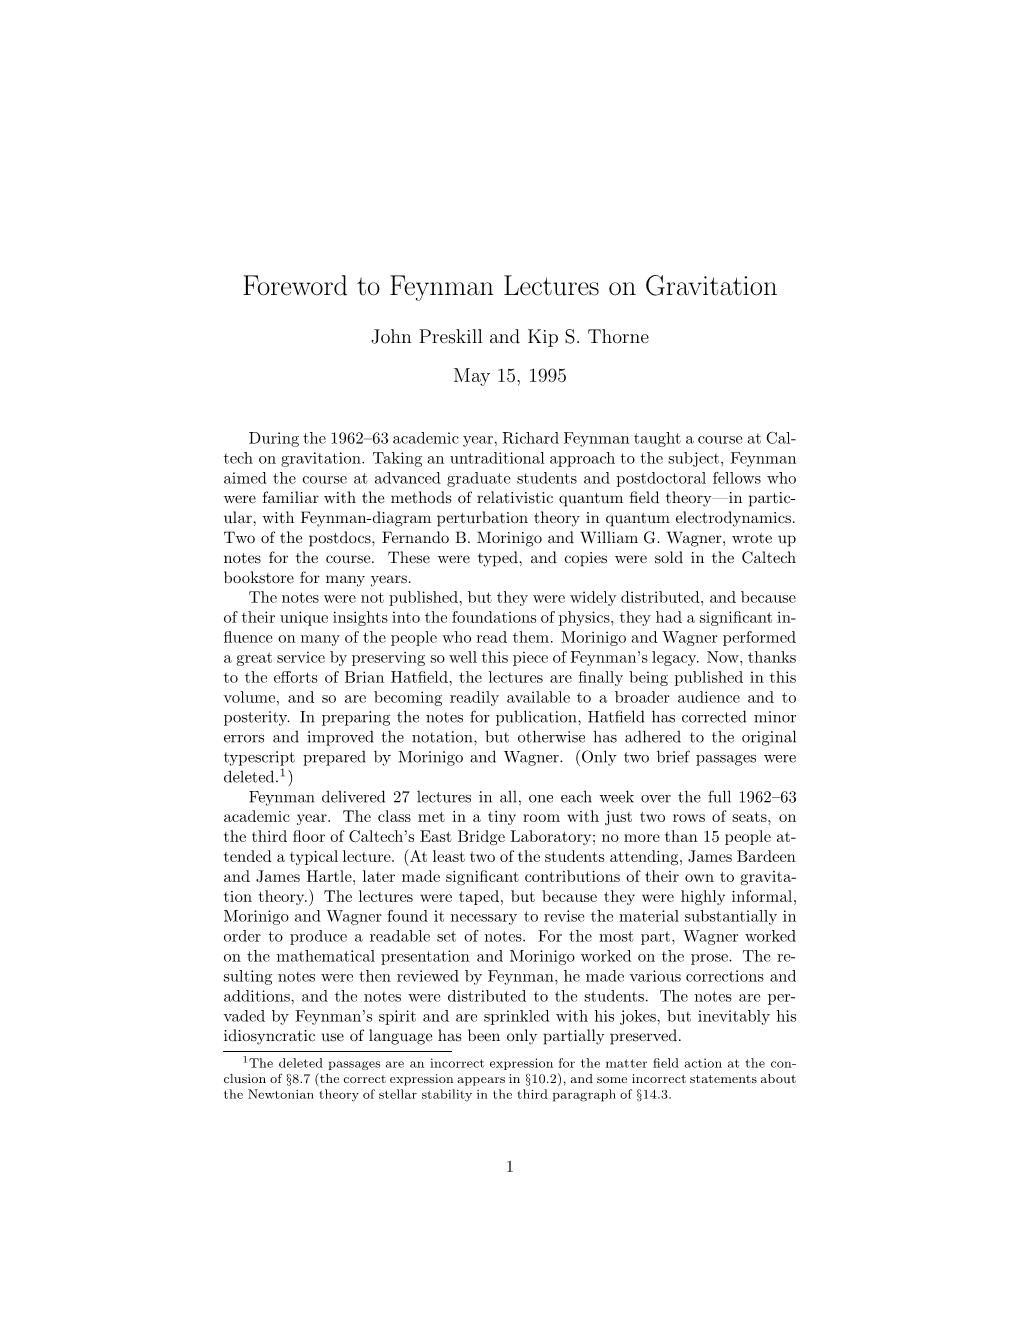 Foreword to Feynman Lectures on Gravitation